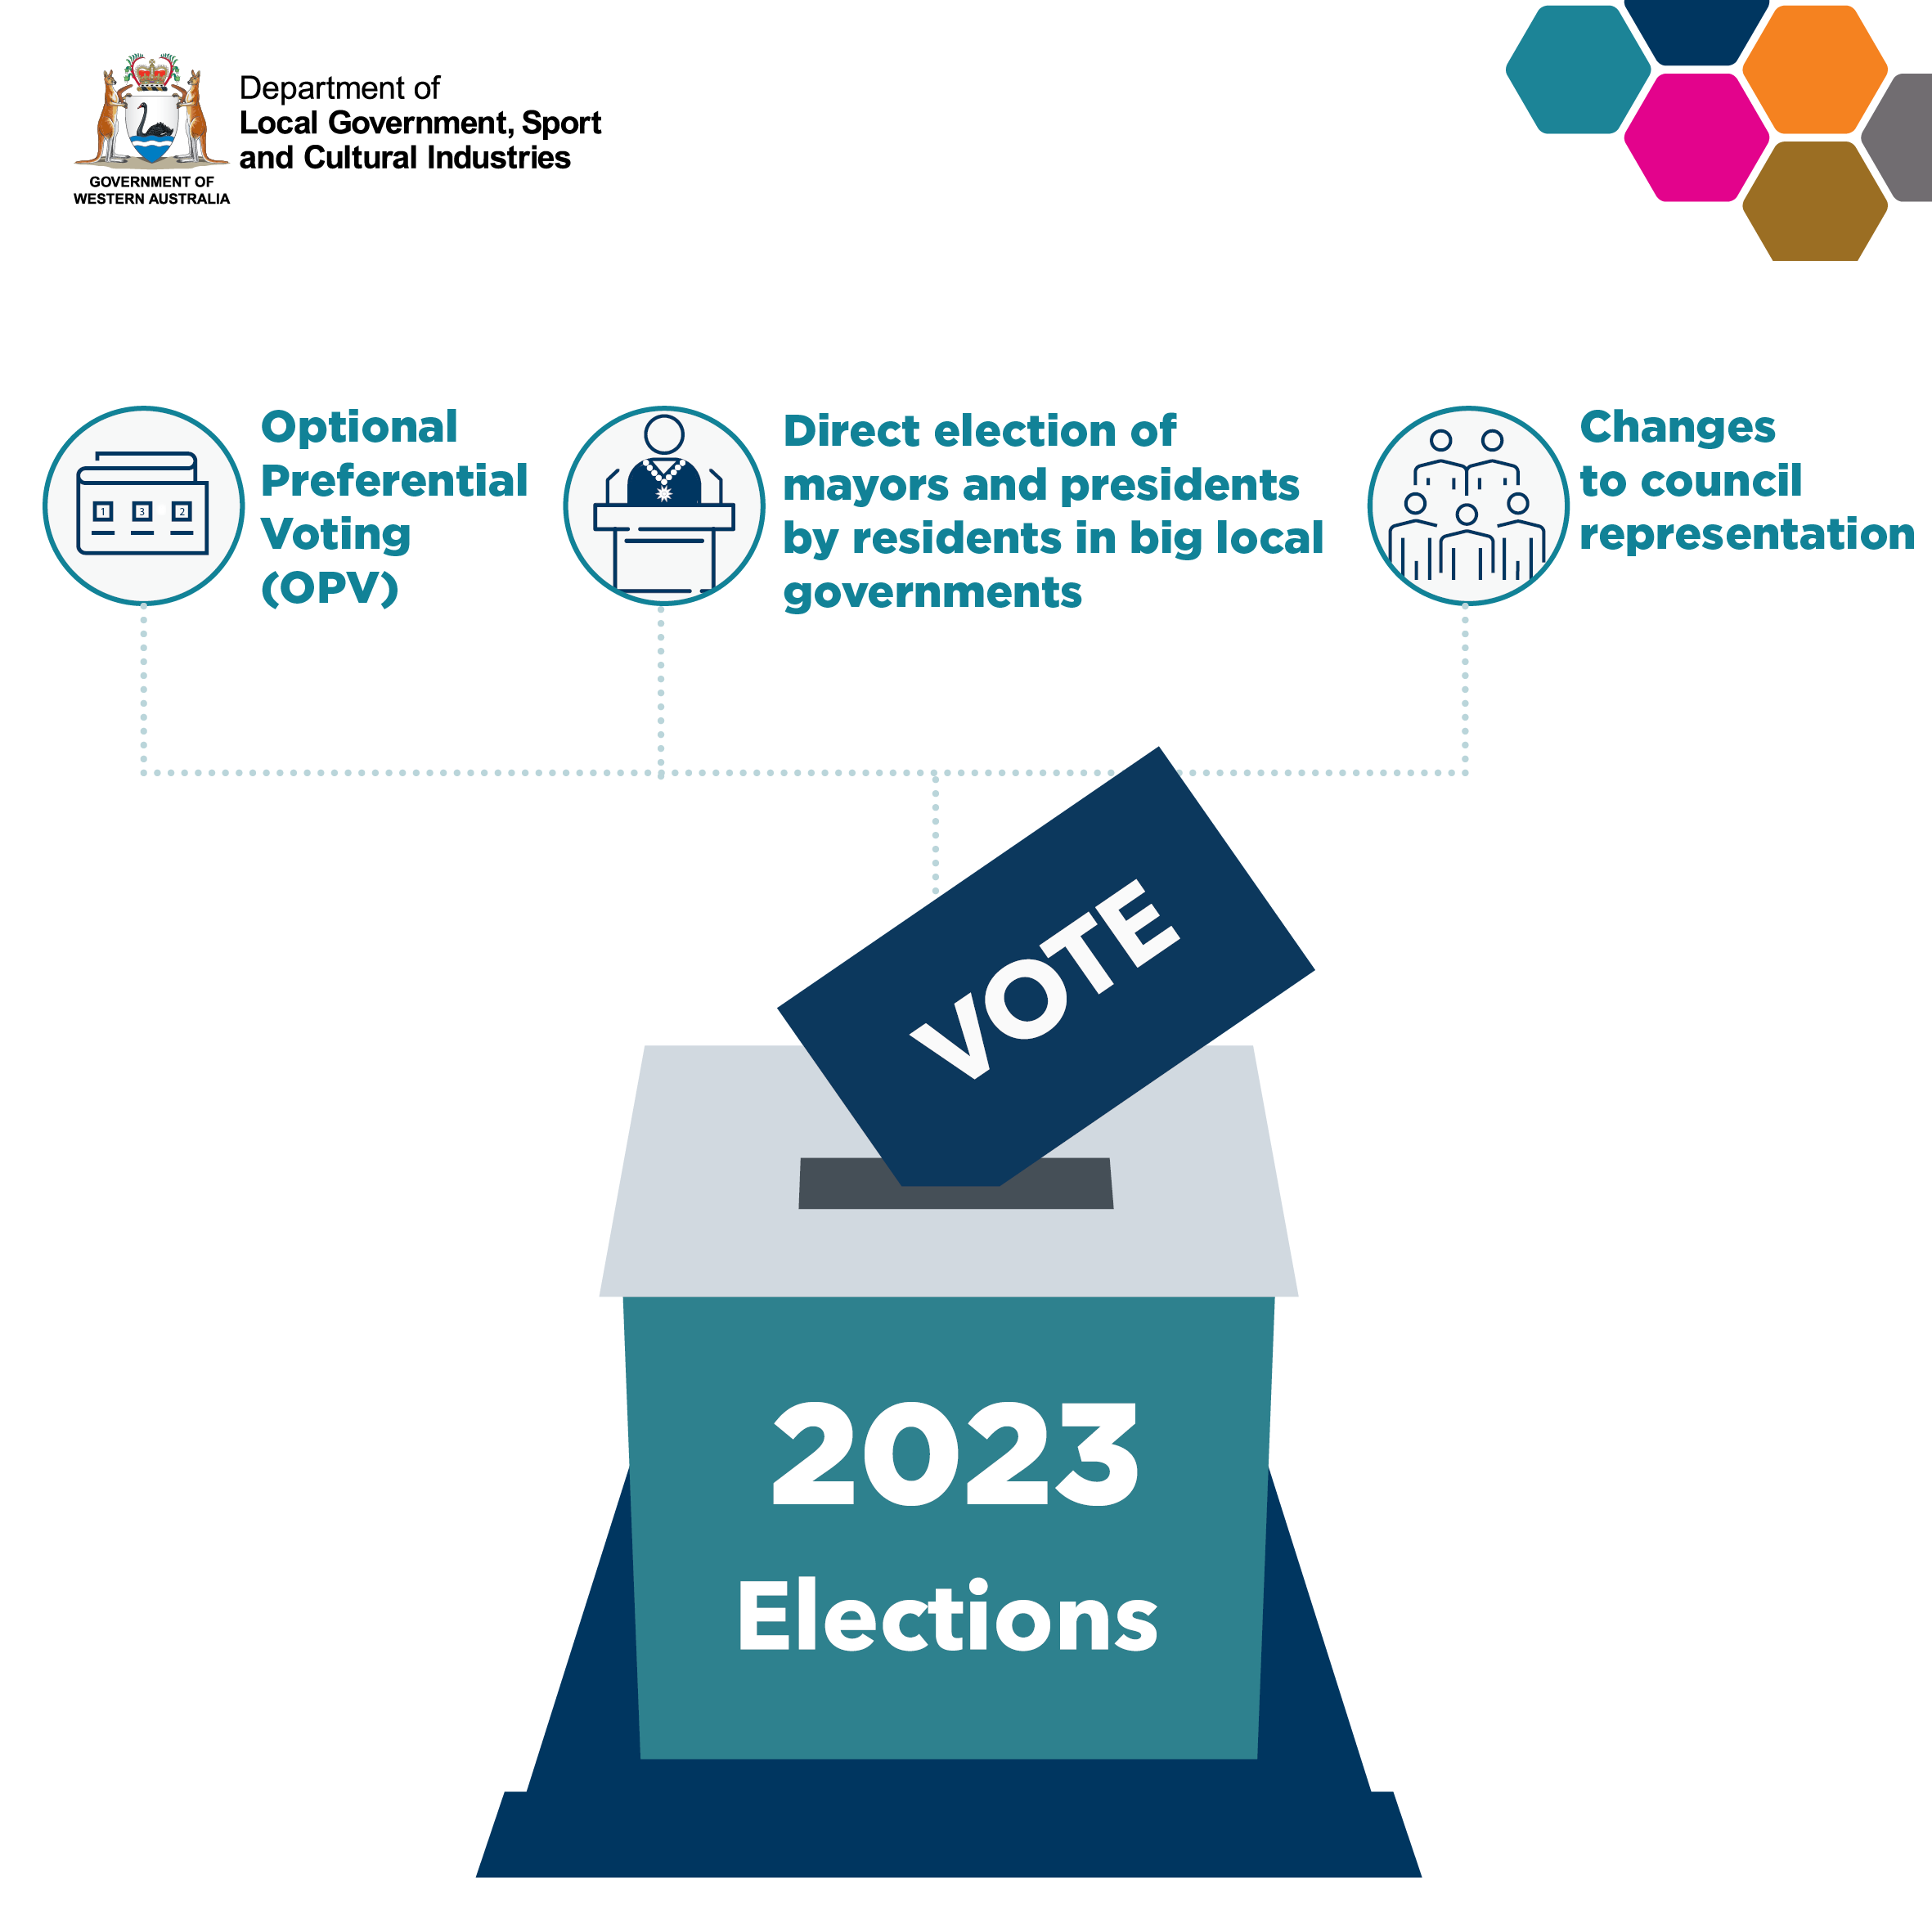 An infographic to explain voting in the 2023 local government elections